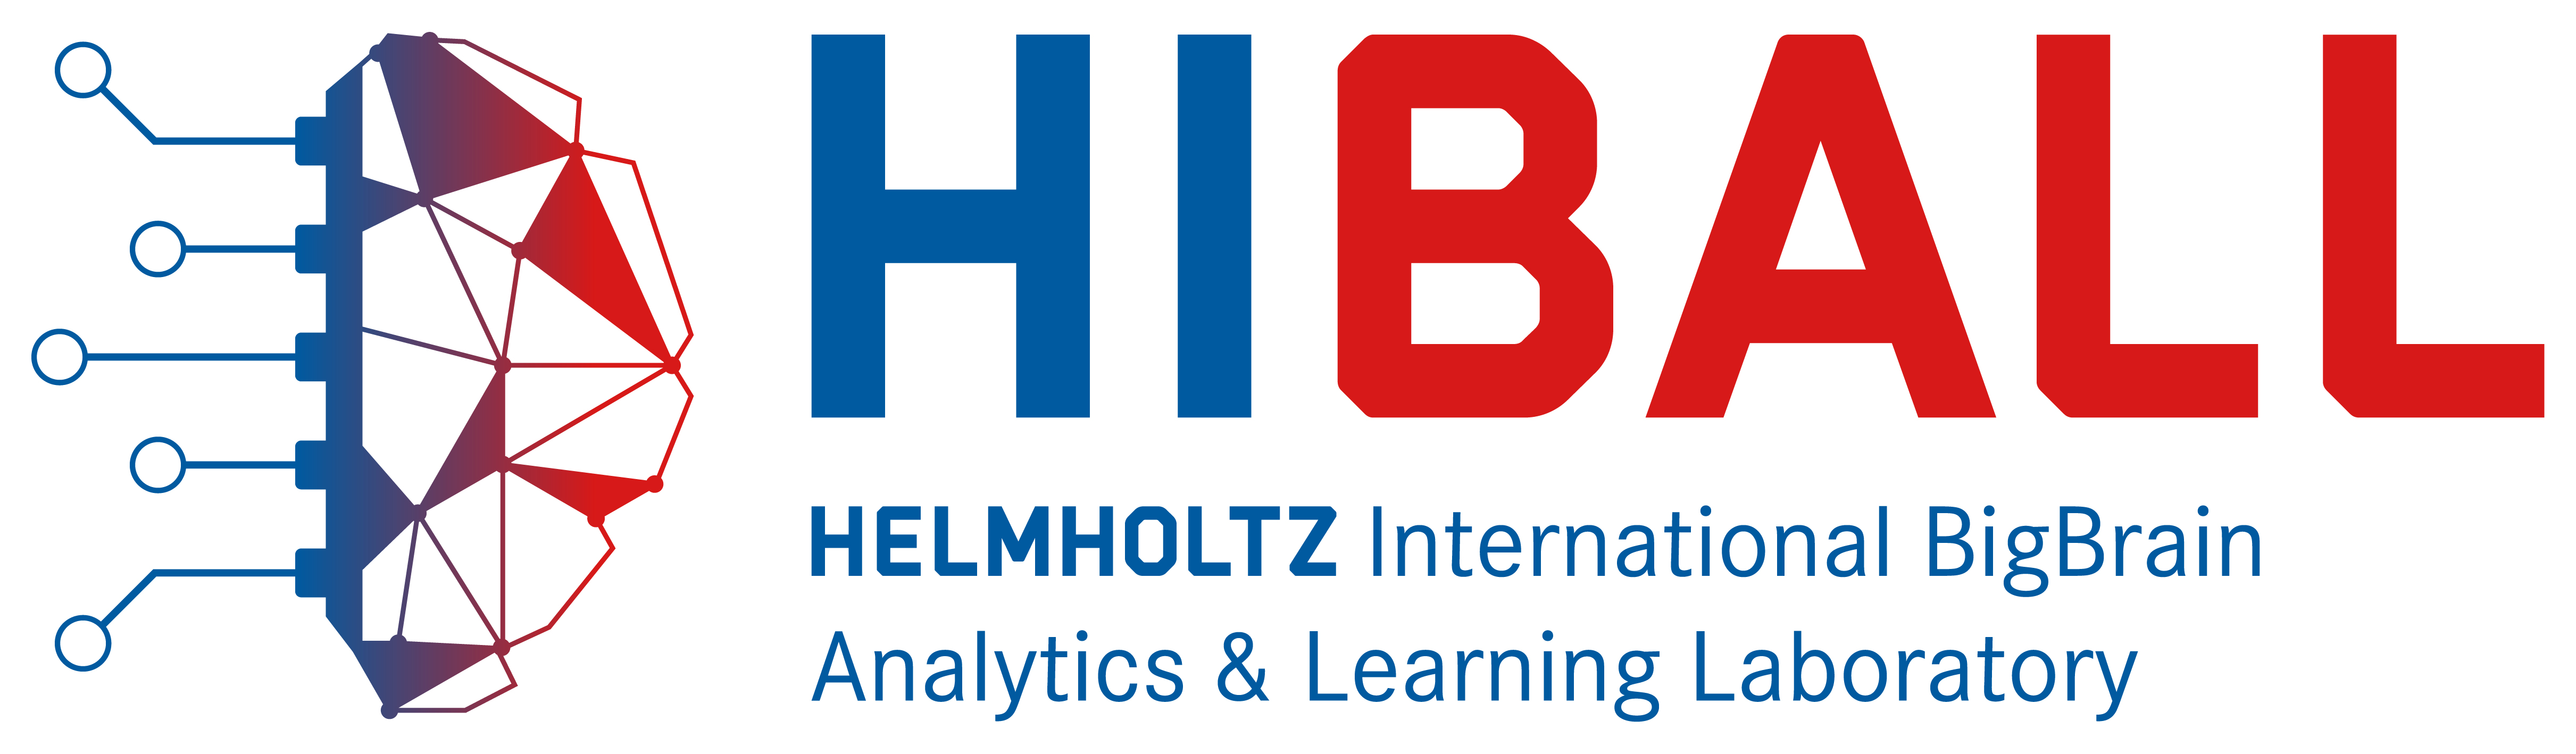 Logo for the HIBALL initiative.